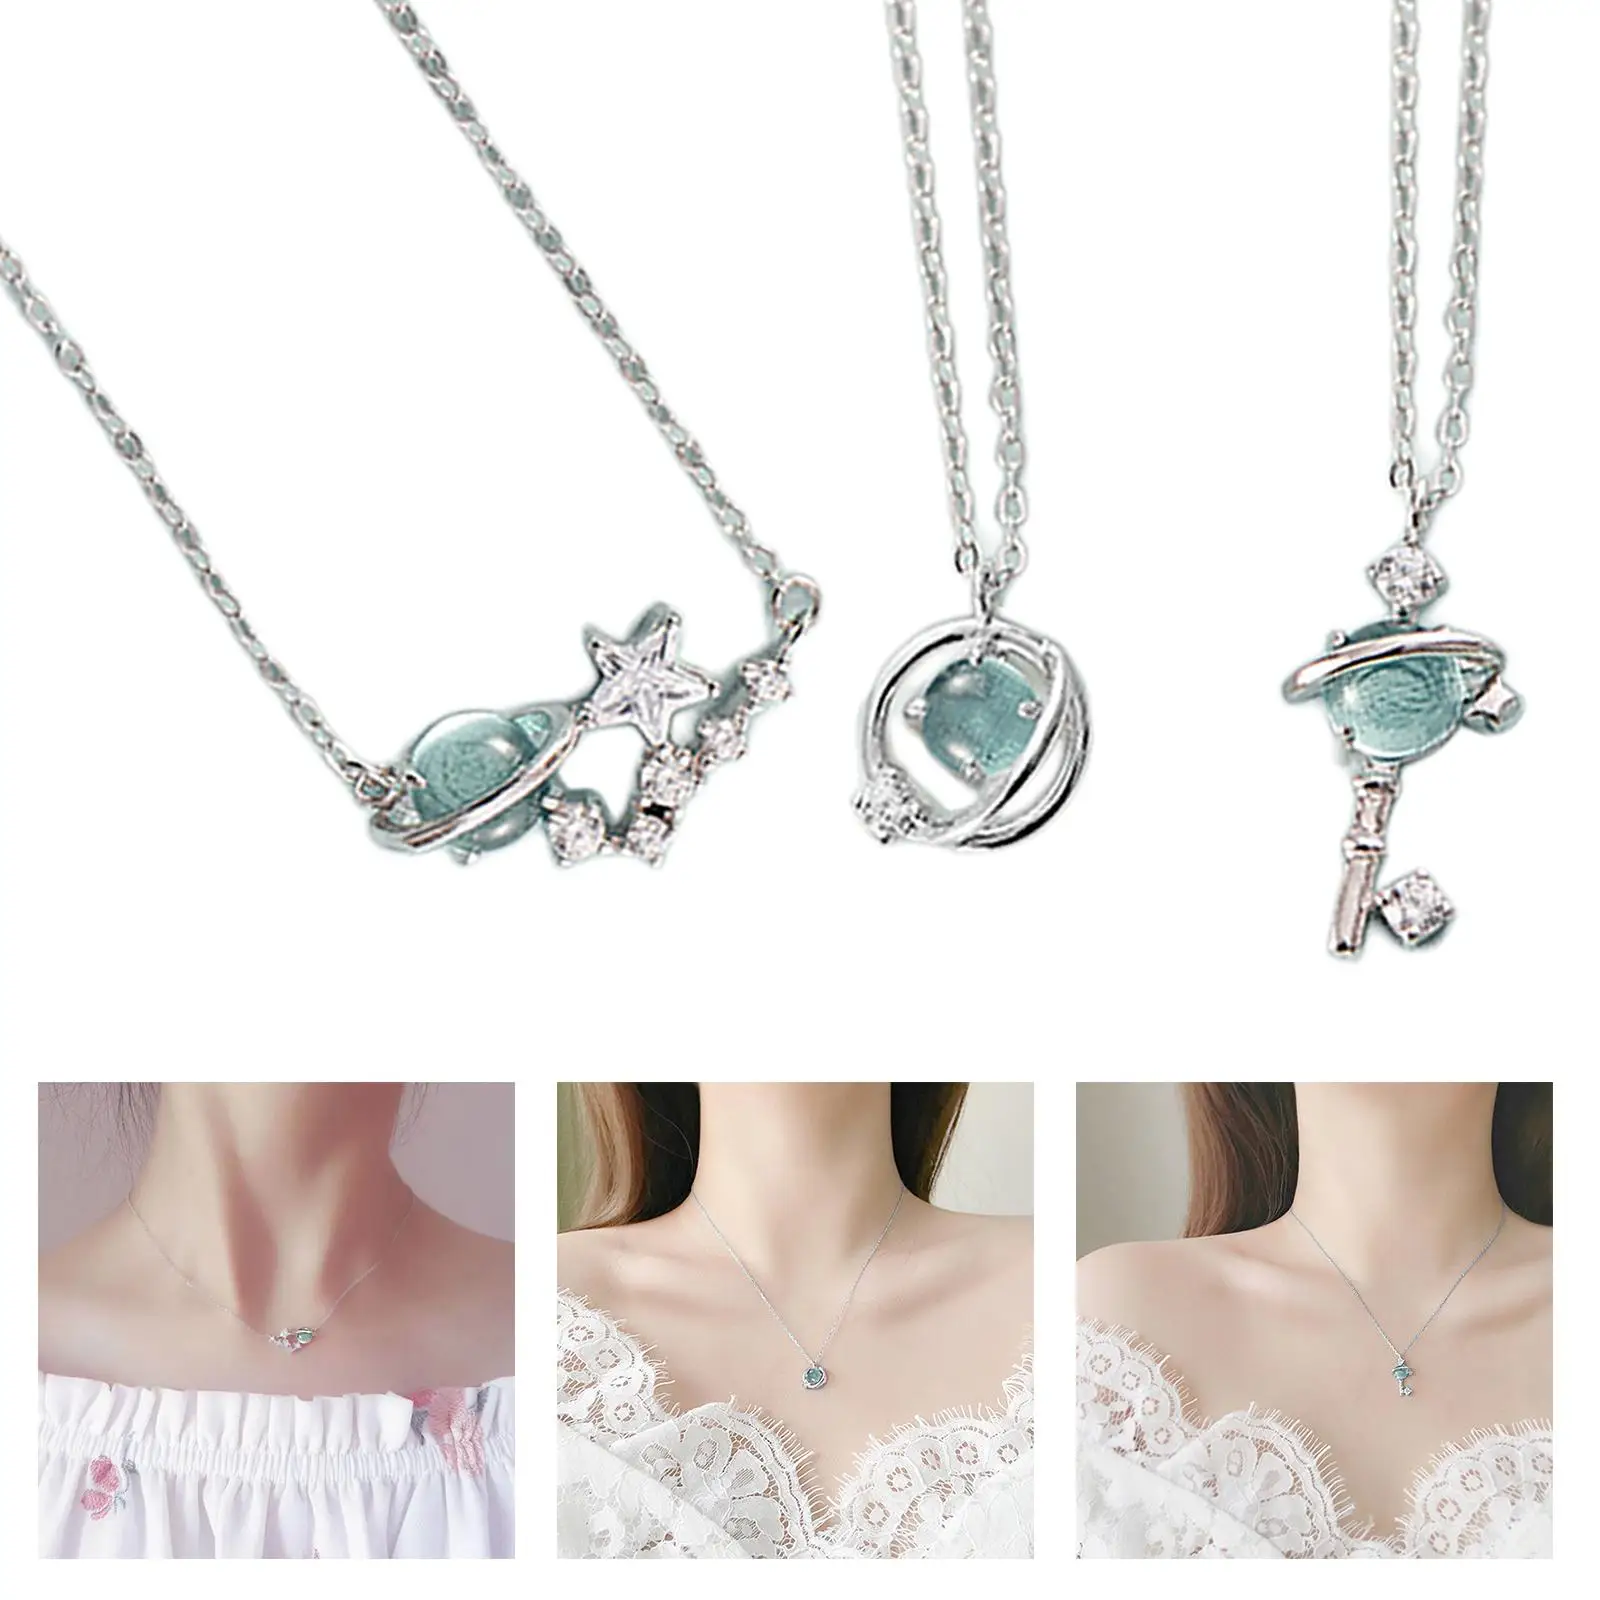 3 pieces Crystal Pendant Earth Stars Moon Natural Pendulum Clavicle Chain Temperament Necklace Chain Jewelry Gifts Women